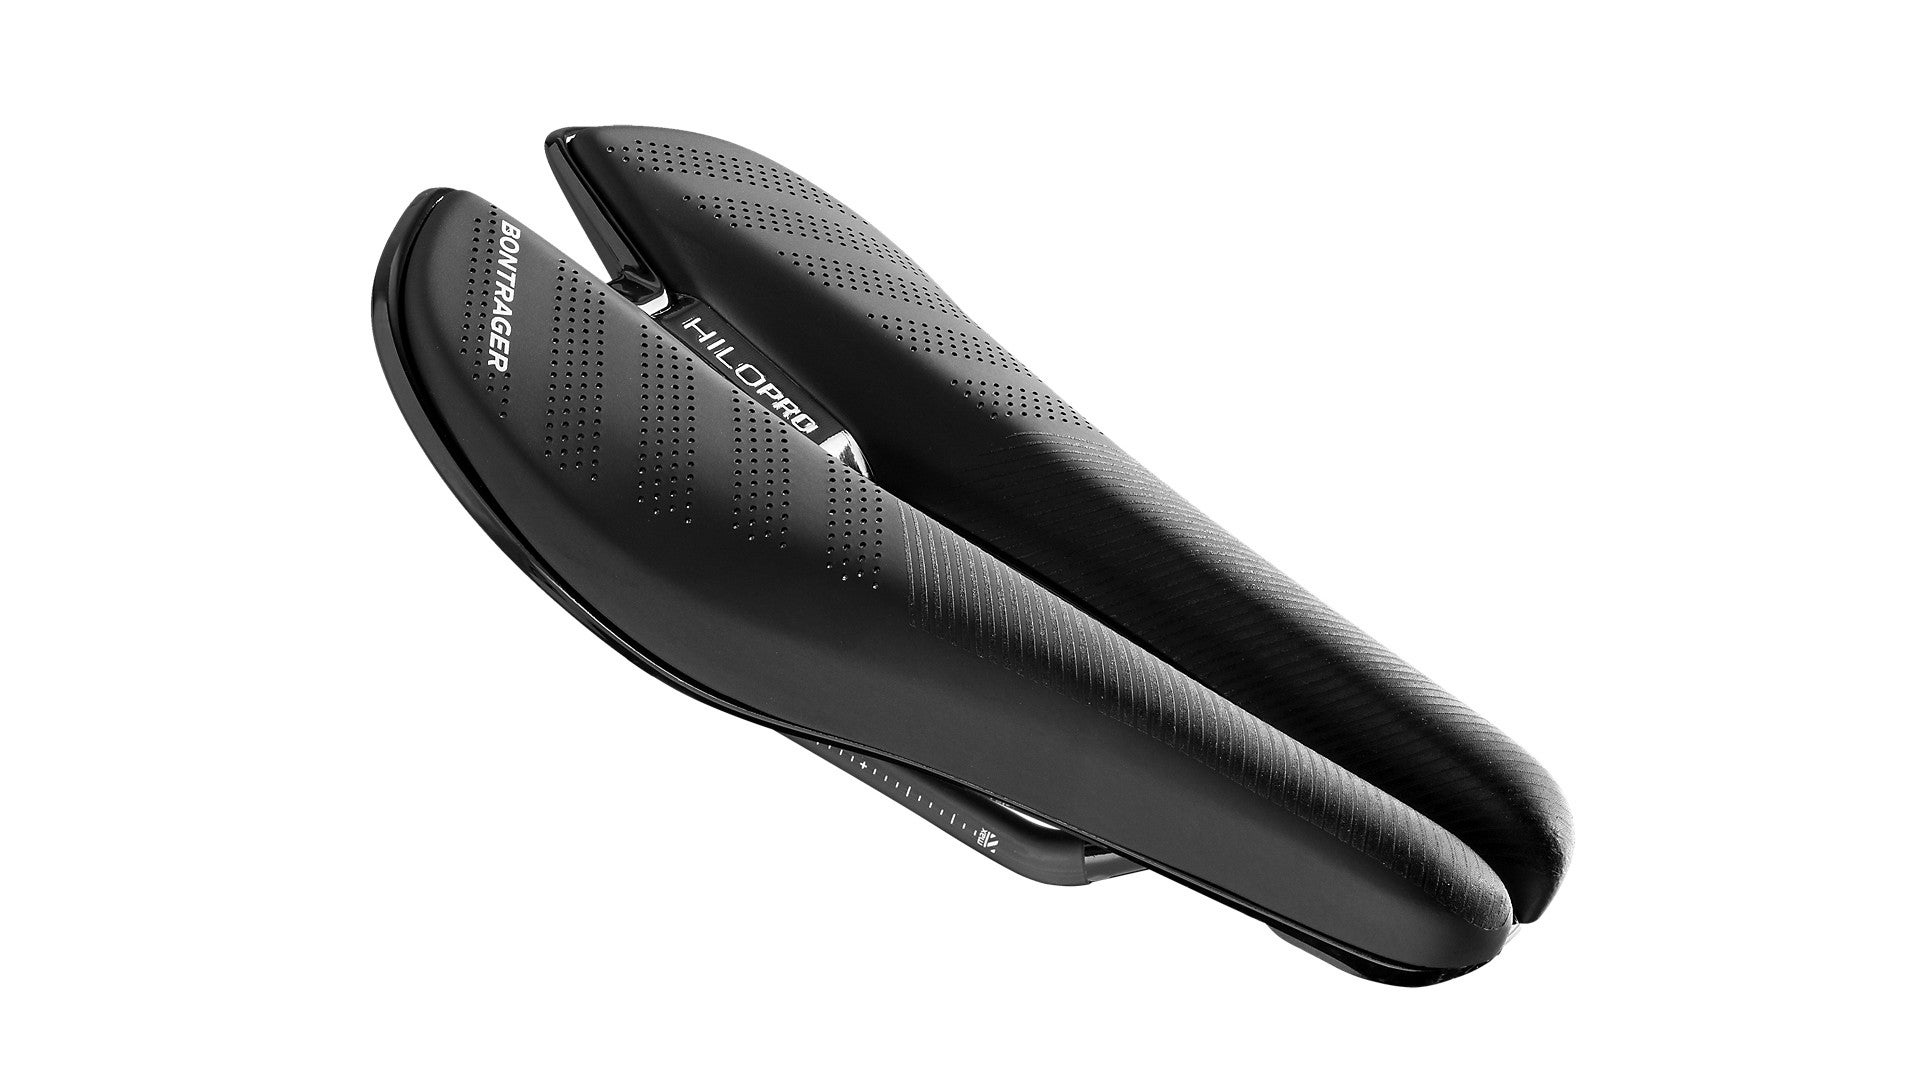 Our gear editors round up the best triathlon saddles of 2021, including the Bontrager Hilo Pro.